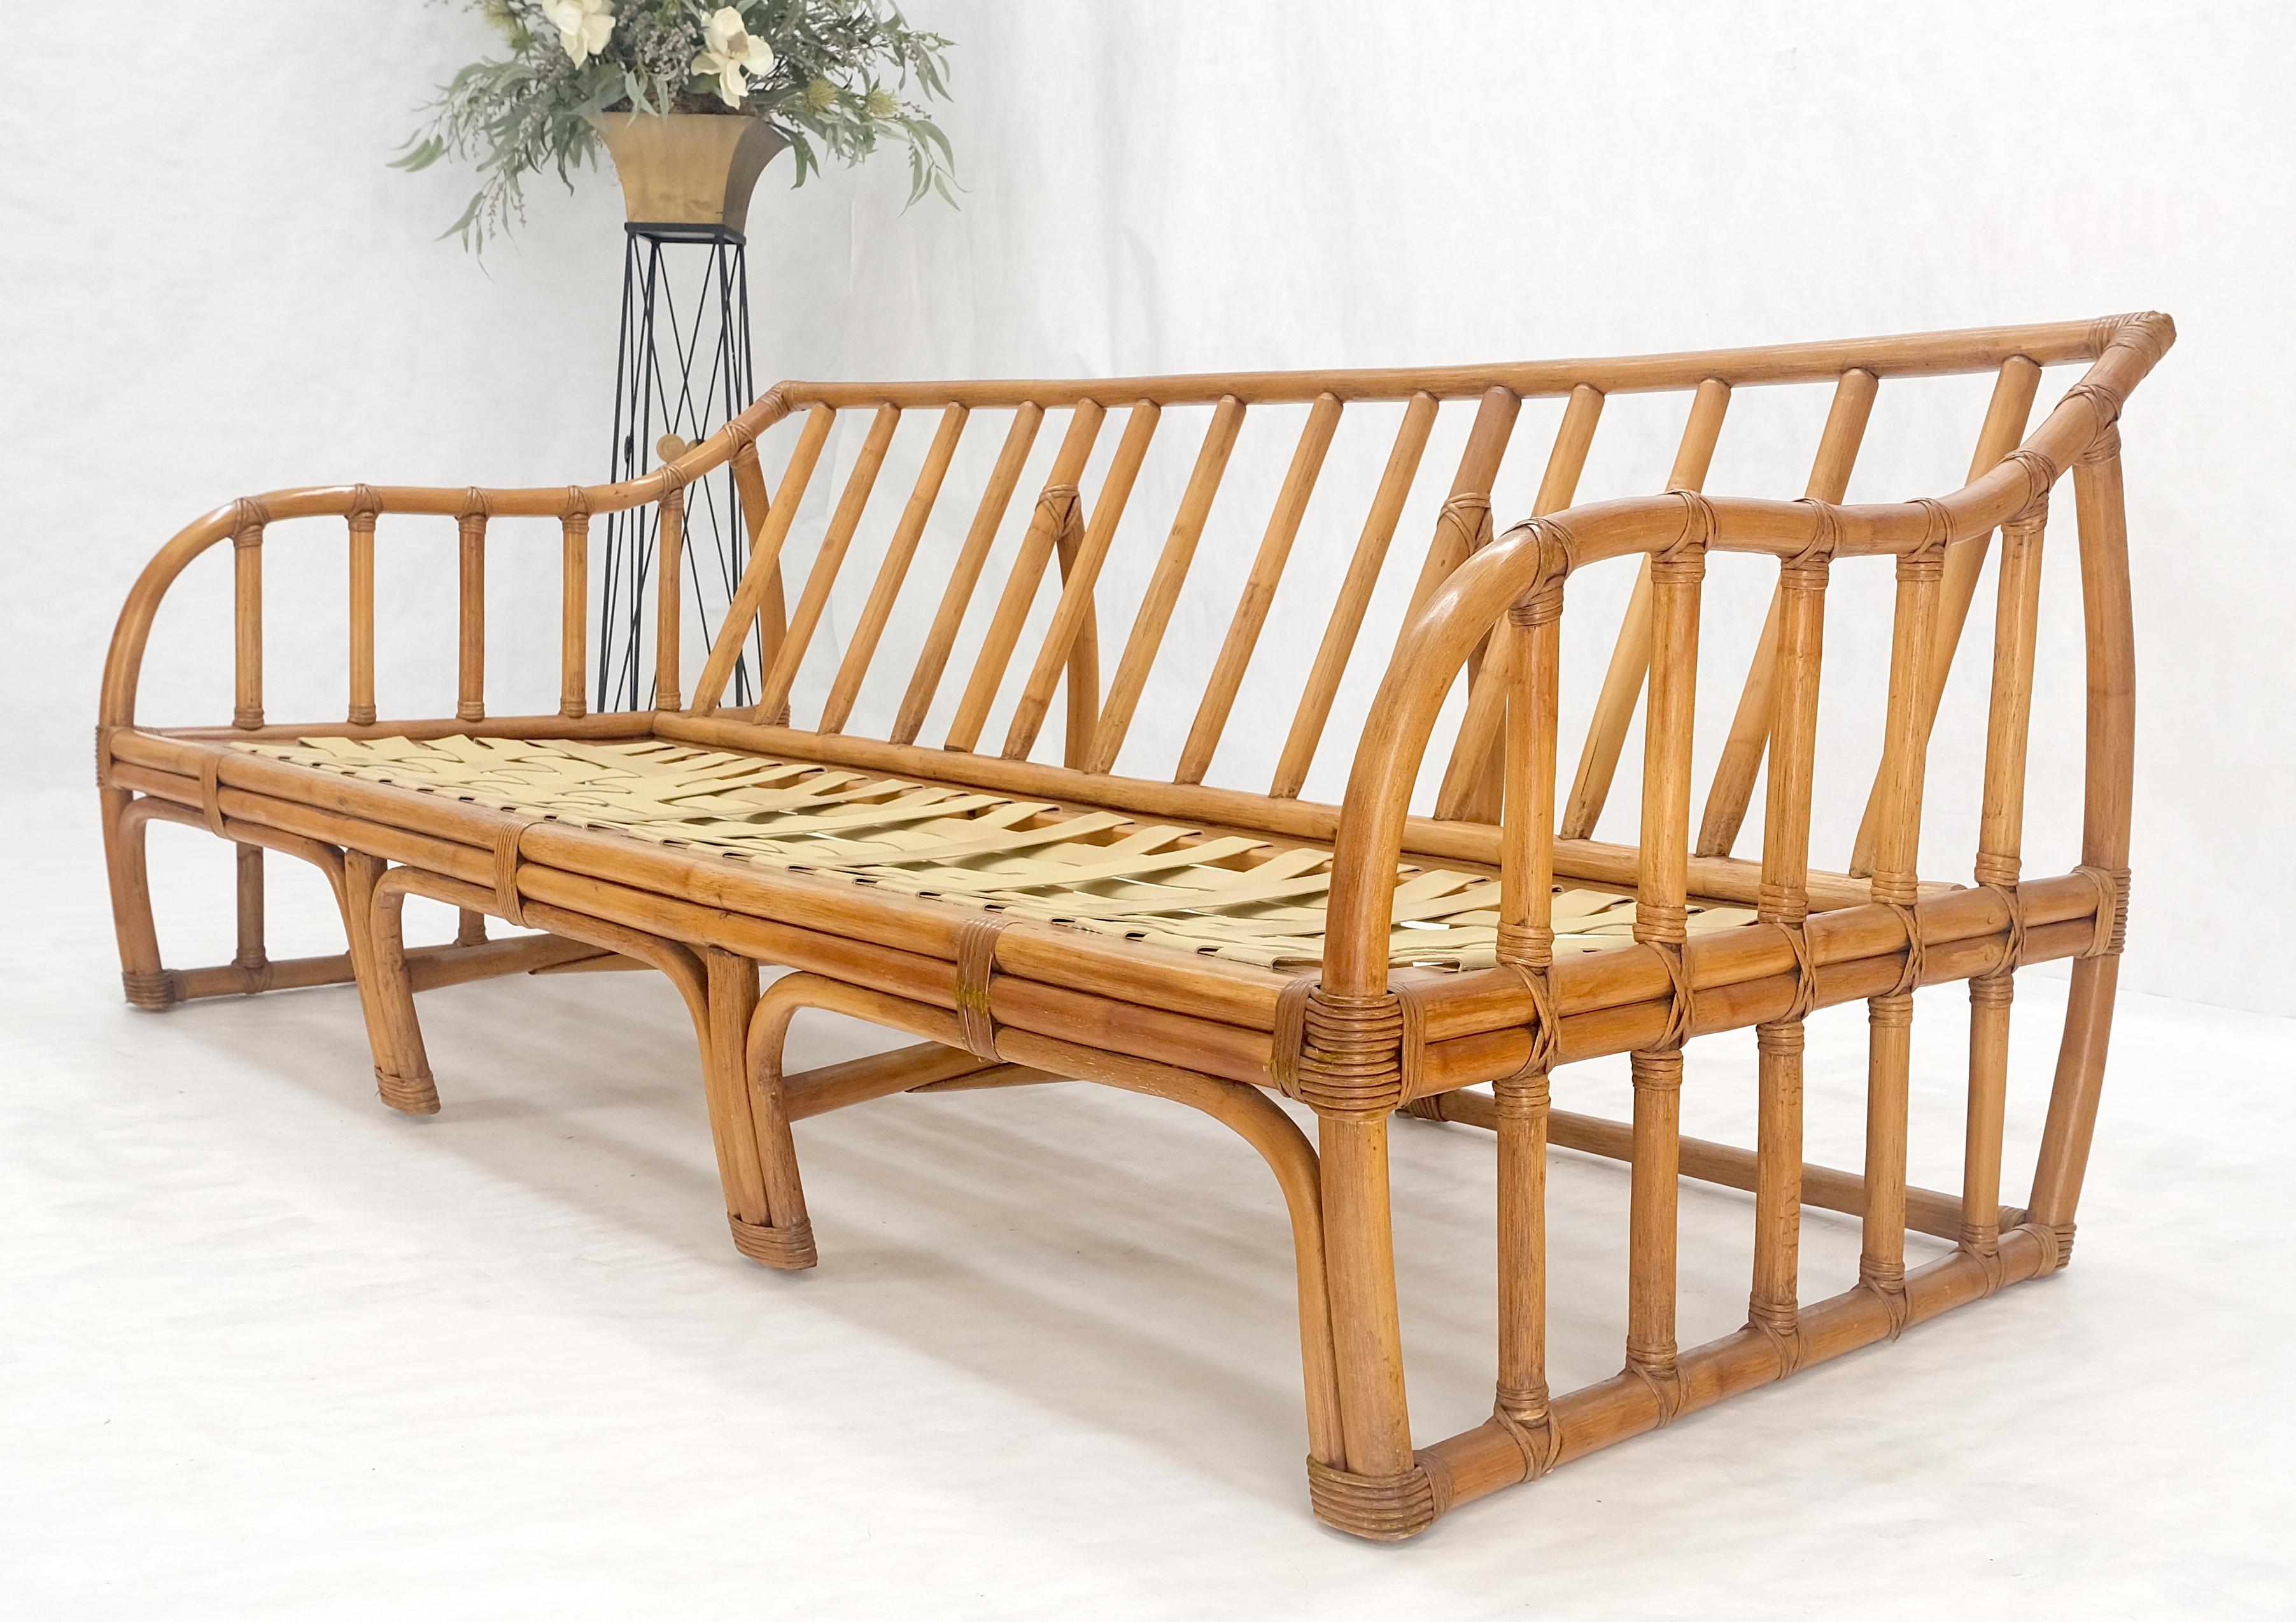 Lacquered Ficks Reed Rattan Bamboo Mid Century Modern Sofa Frame MINT! For Sale